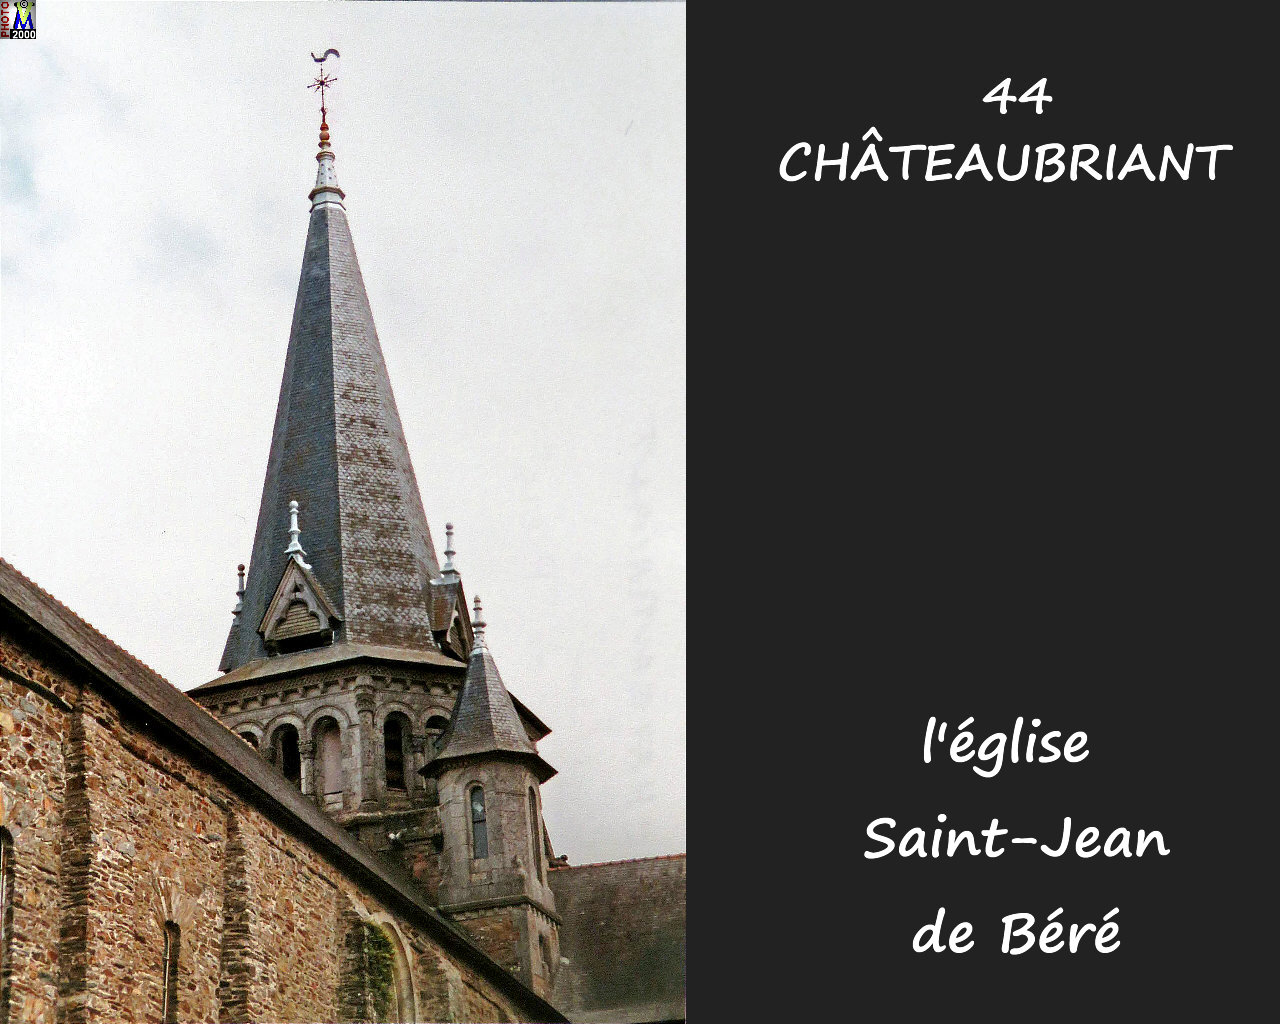 44CHATEAUBRIANT_eglise_Bere_106.jpg